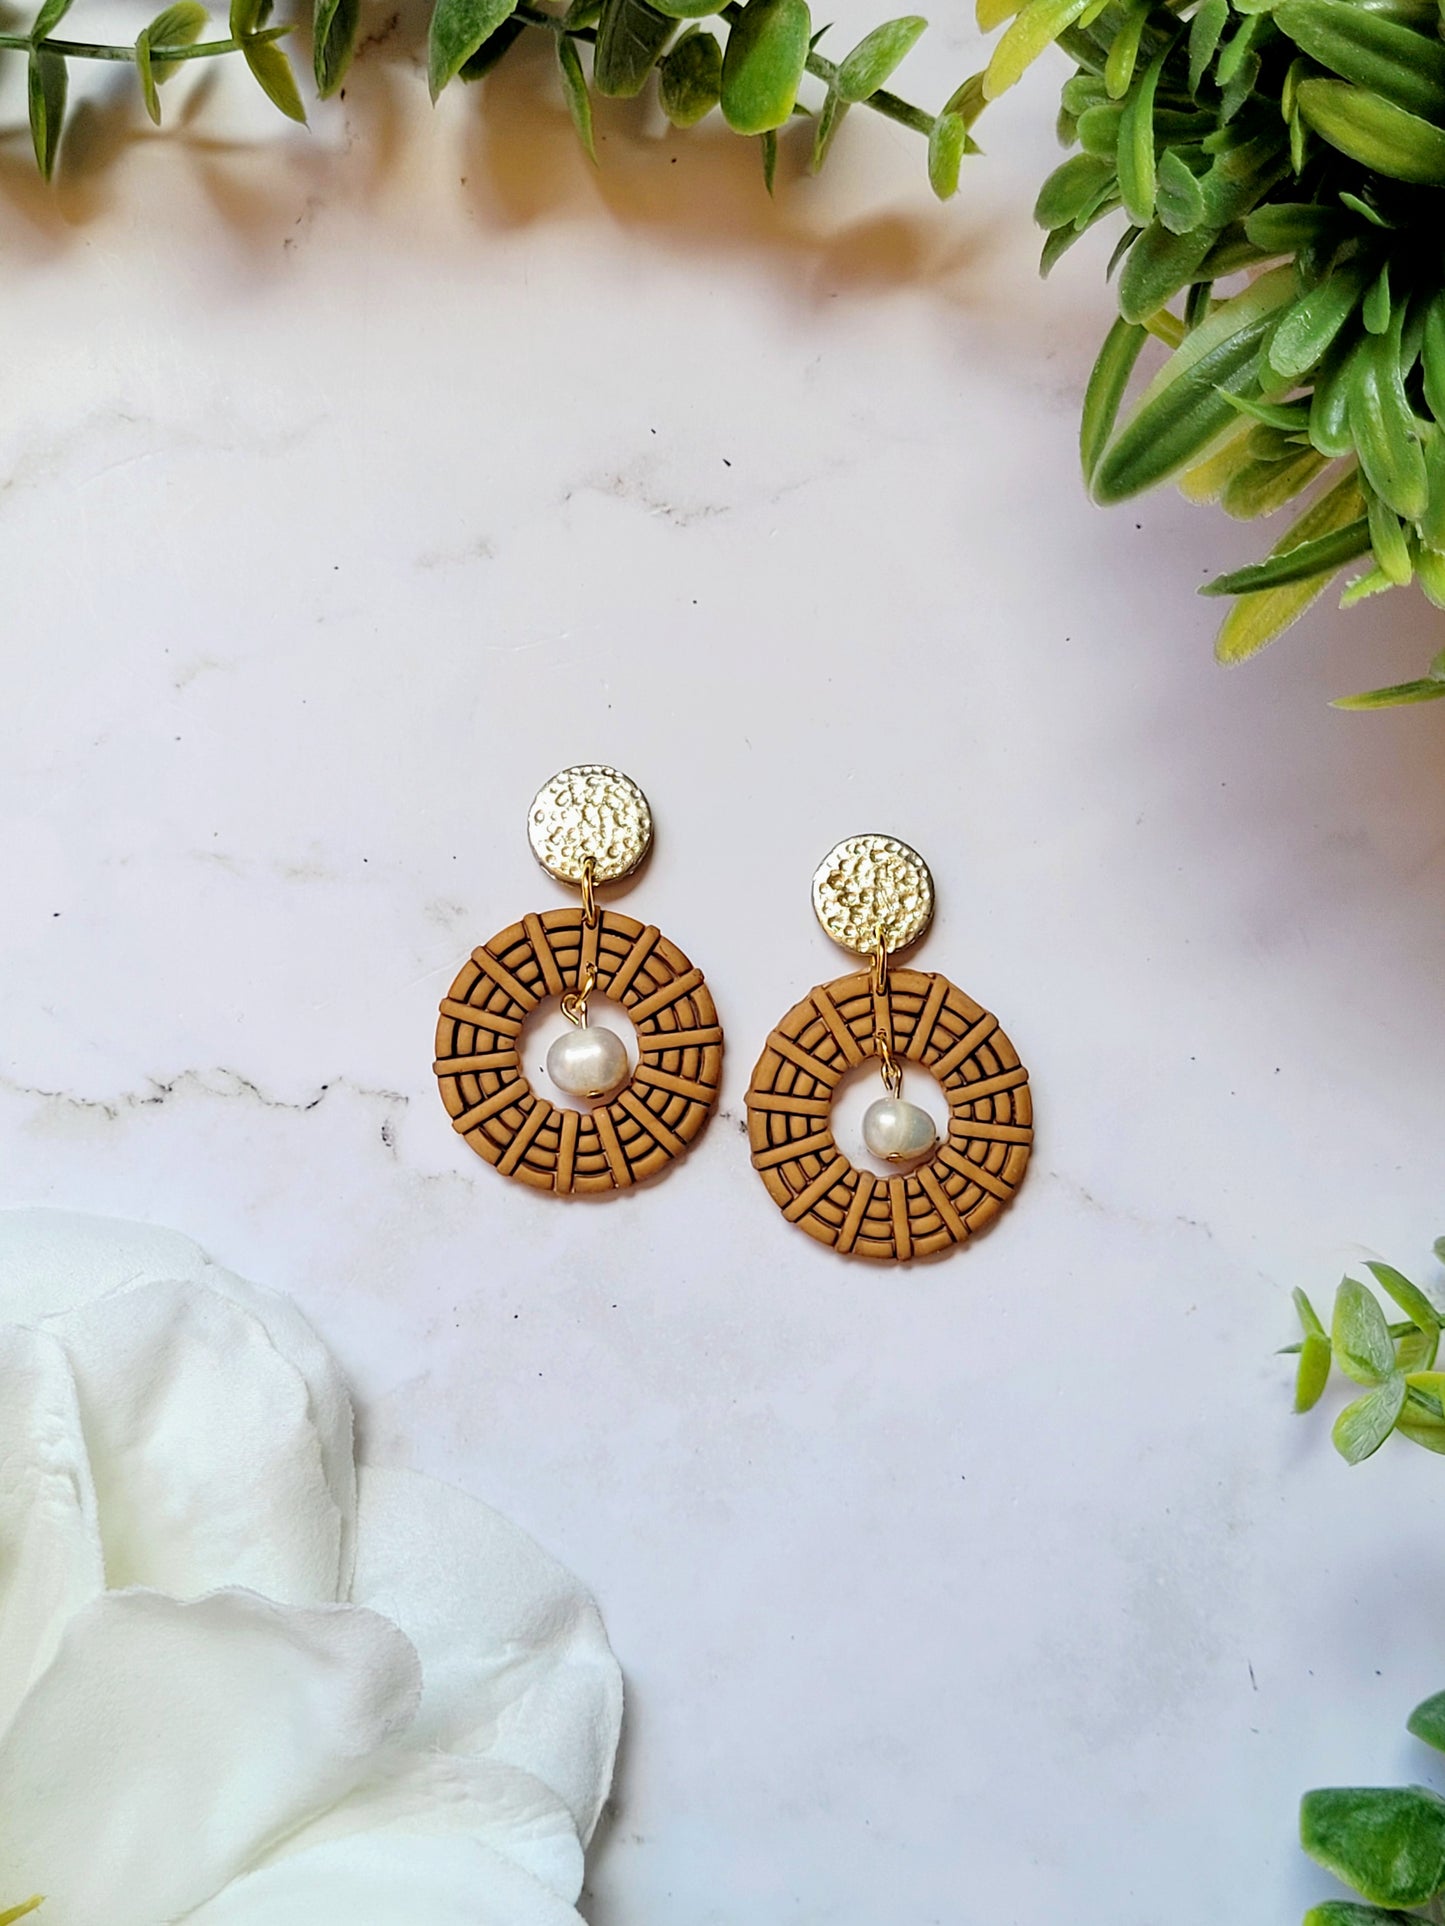 close up of round rattan earrings on a marble background with foliage.